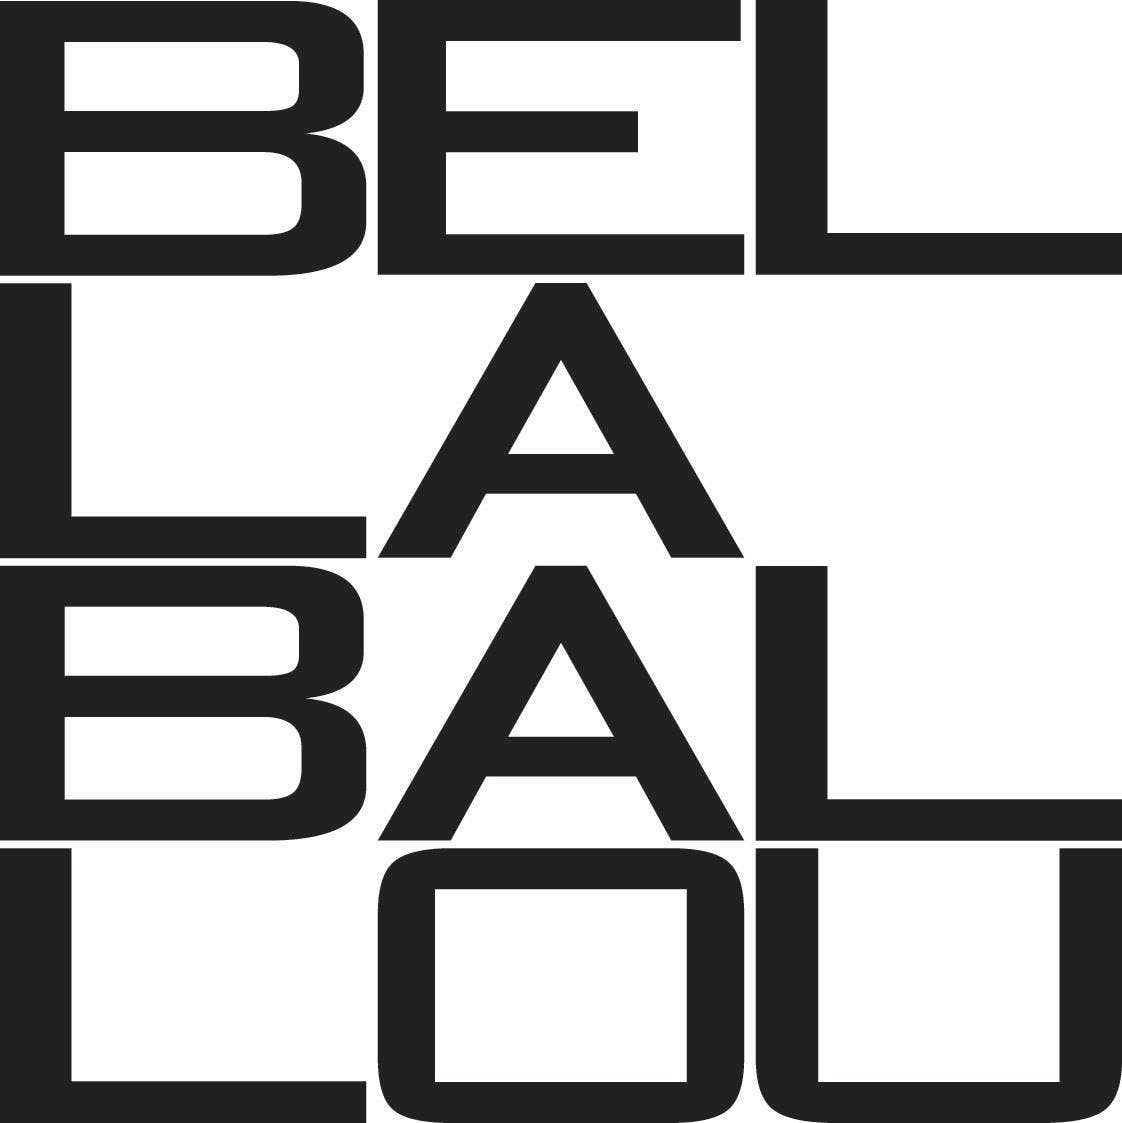 Ballou products